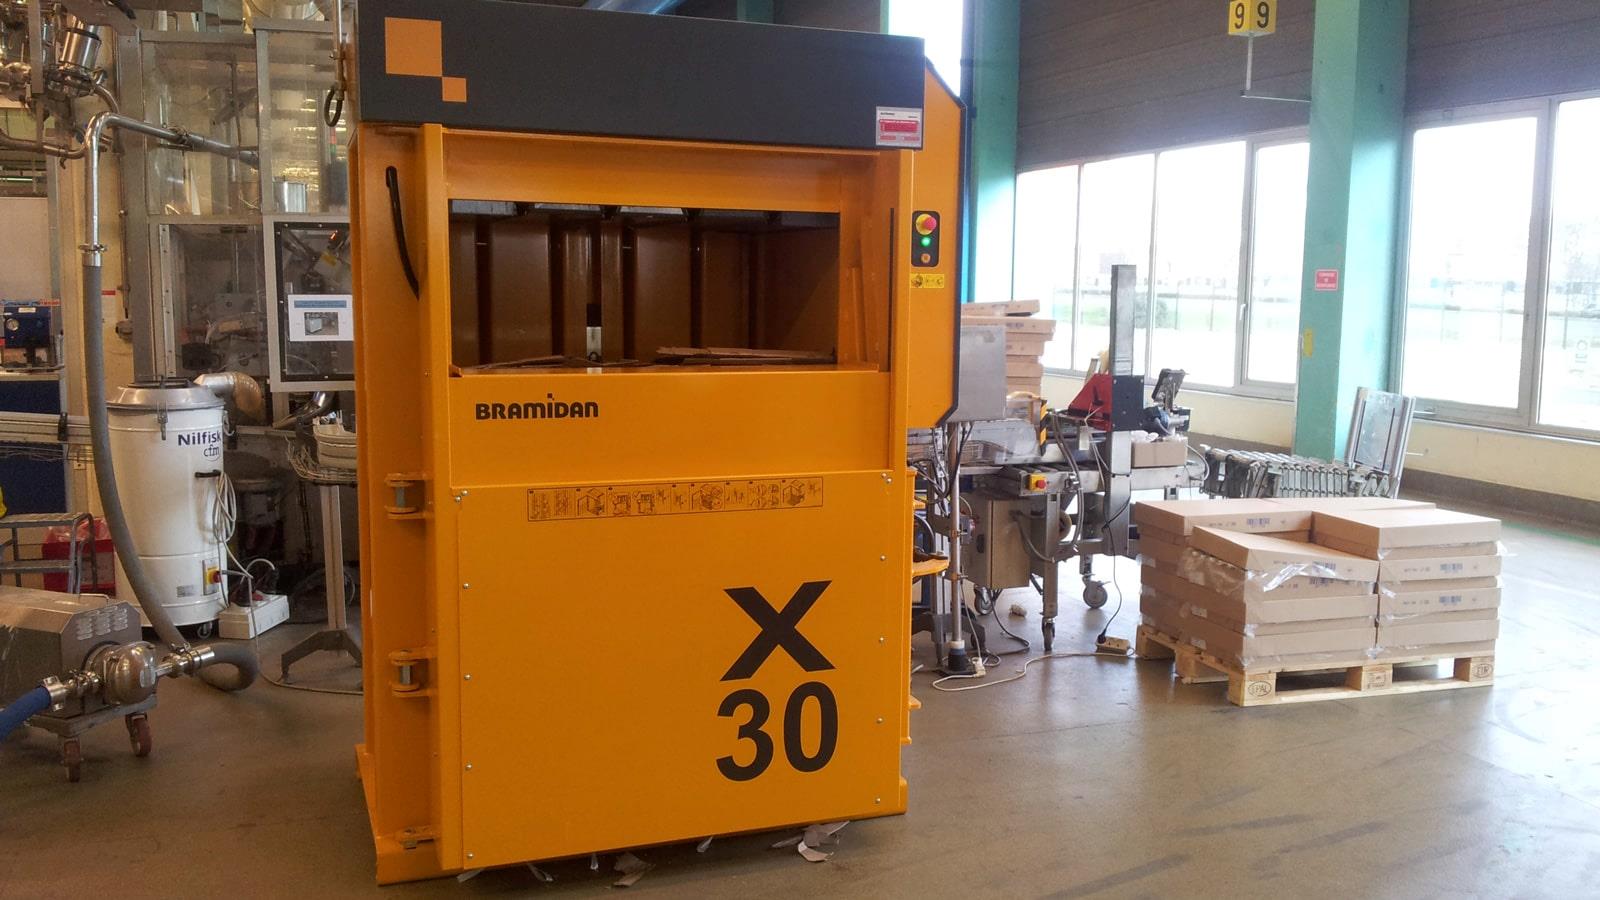 Bramidan X30 AD baler with automatic door placed in Cosmeva production area